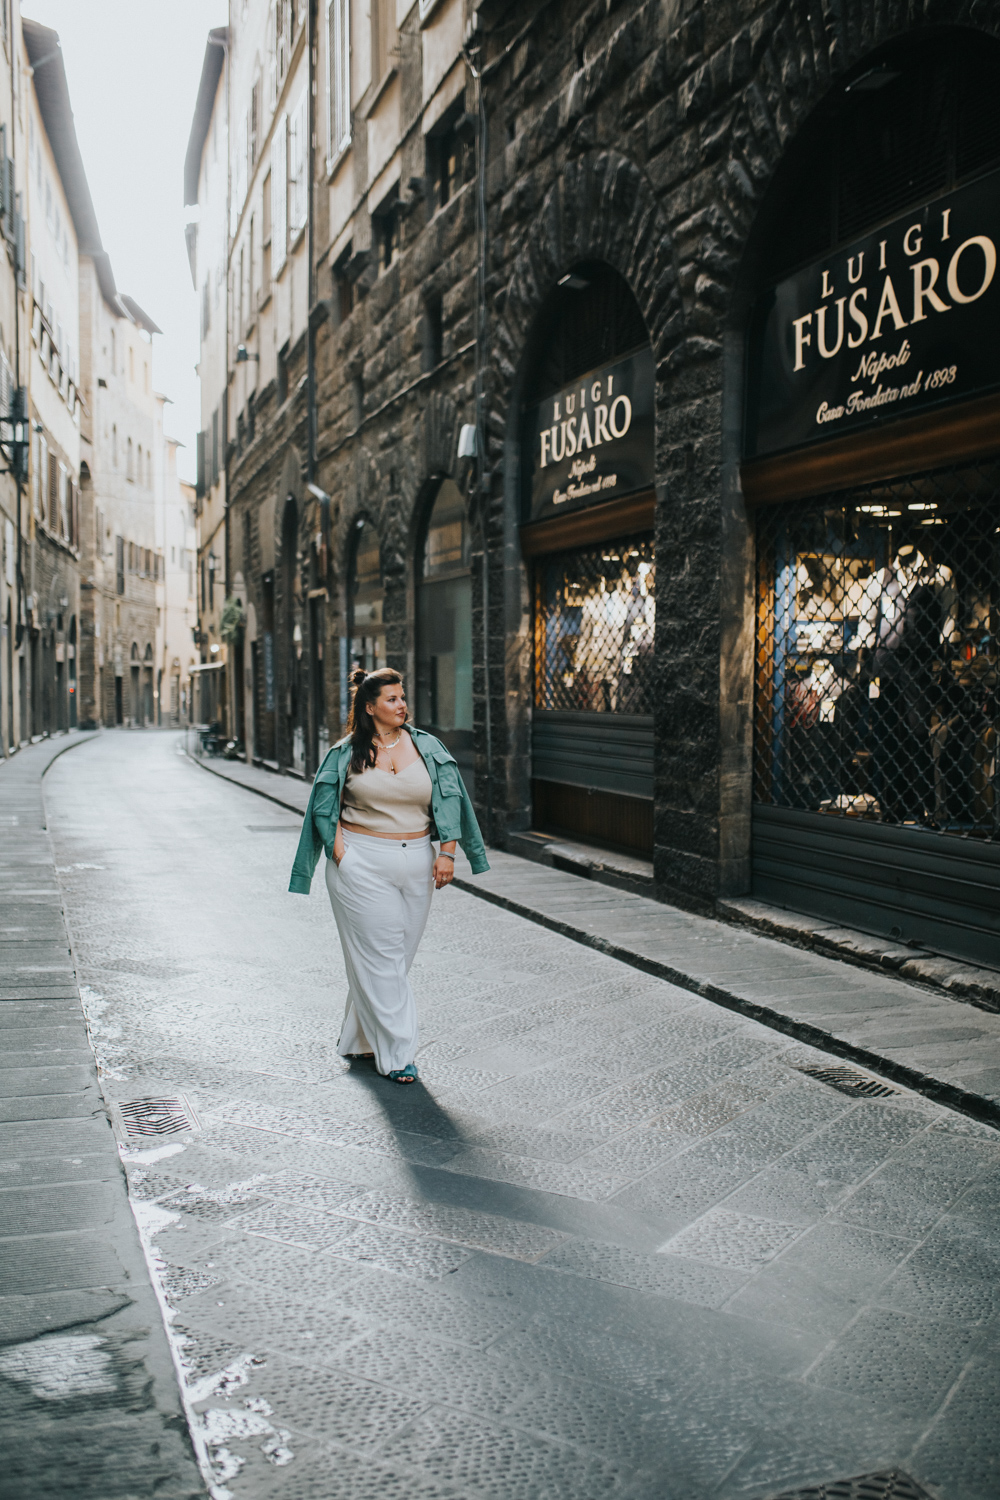 Portrait photoshoot in Florence, Italy